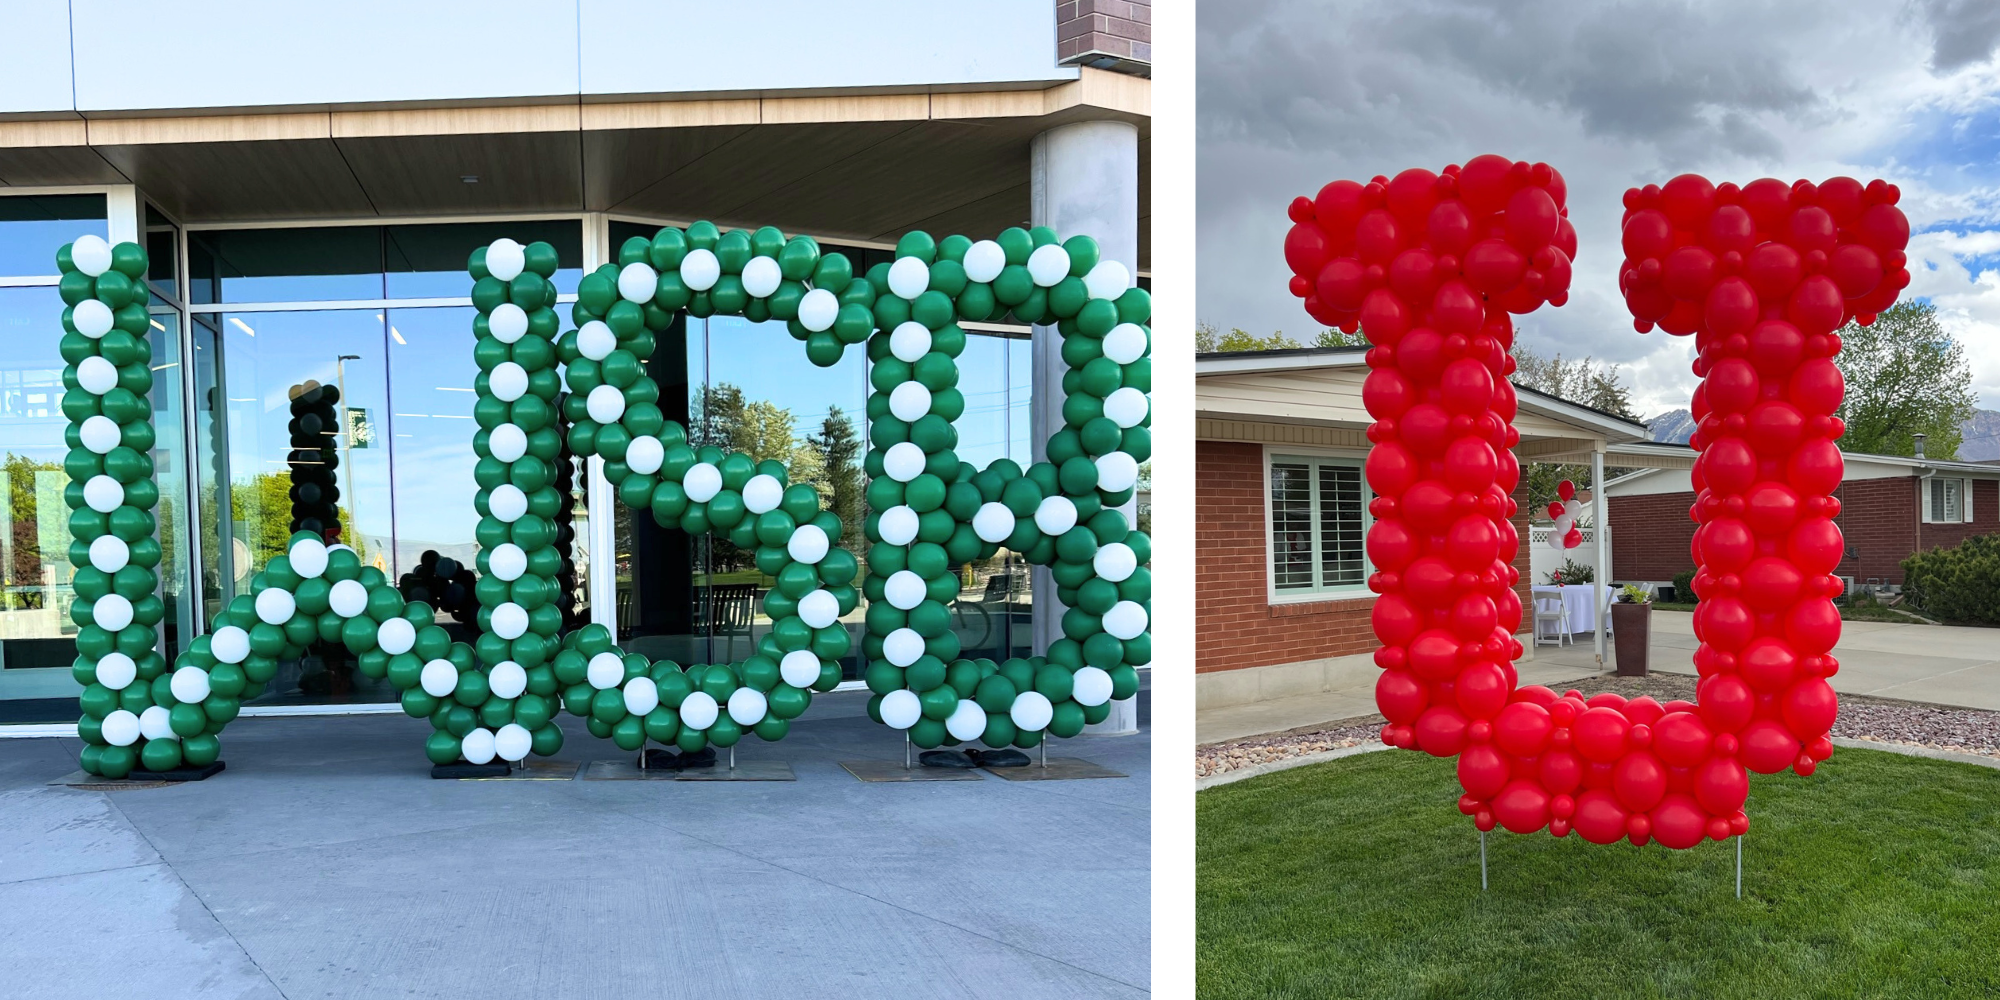 Giant Balloon Letters celebrate graduation across Utah from the Woodbury School of Business at UVU or the Block U at the University of Utah